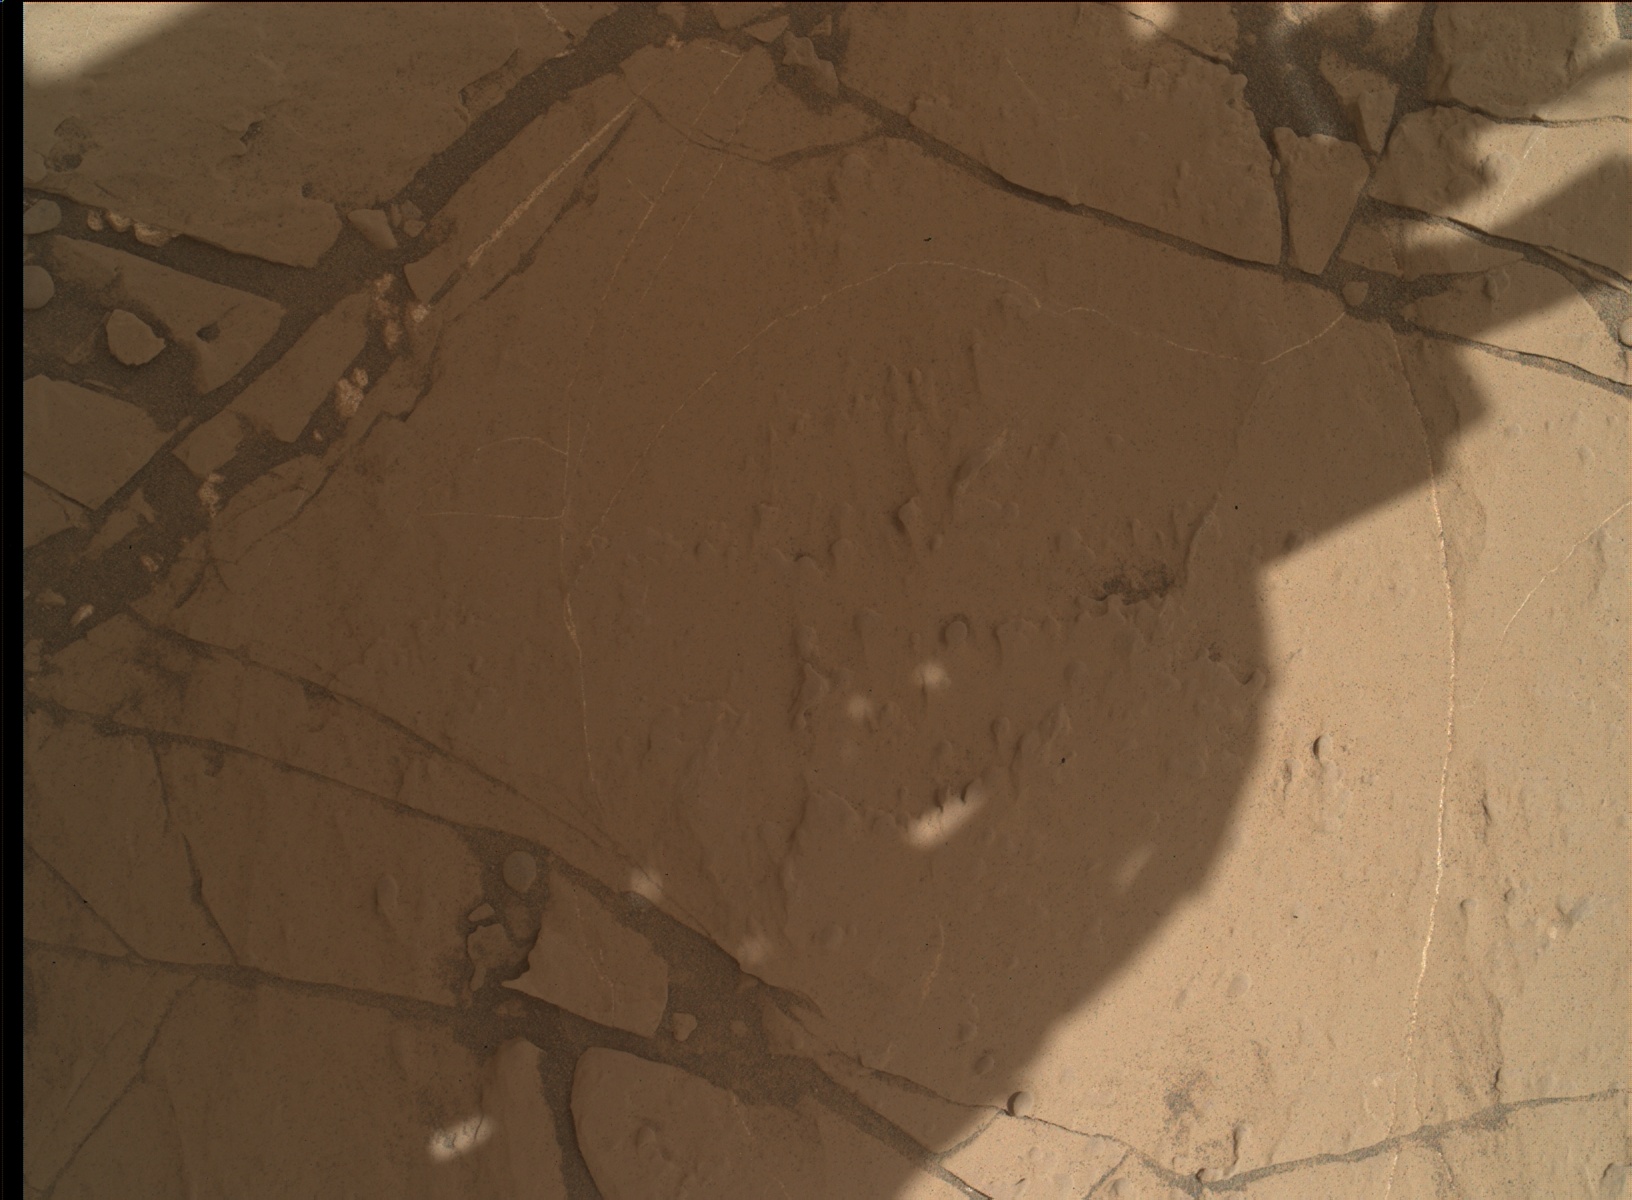 Nasa's Mars rover Curiosity acquired this image using its Mars Hand Lens Imager (MAHLI) on Sol 1829